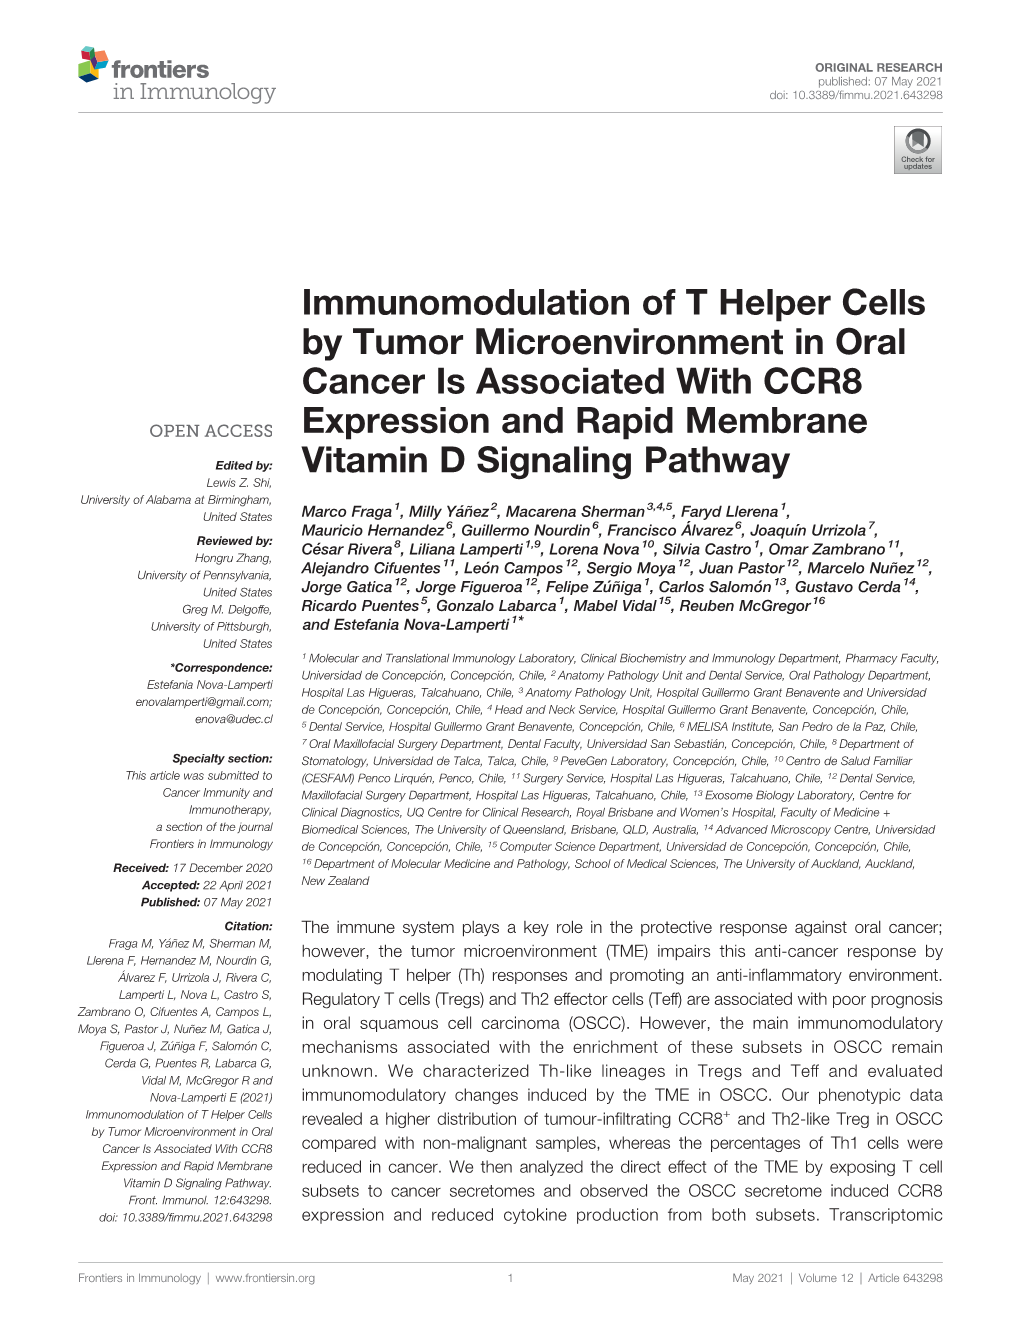 Immunomodulation of T Helper Cells by Tumor Microenvironment in Oral